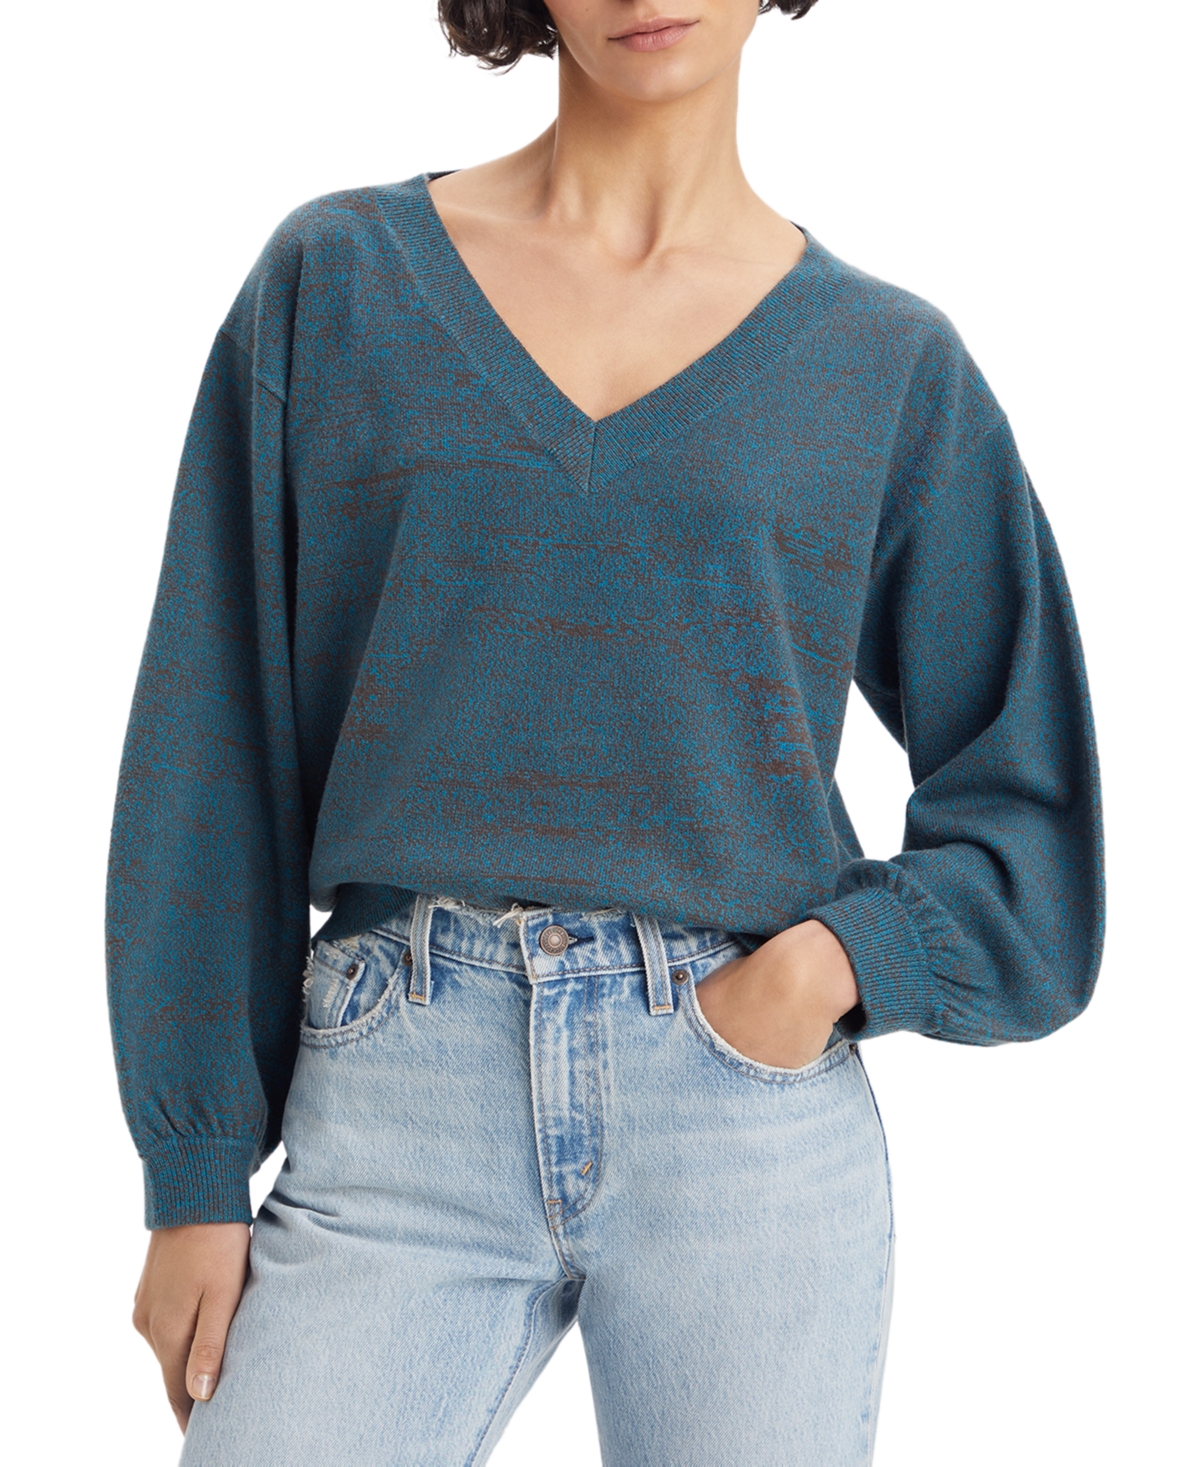 Levi's Women's Flower Sweater In Marled Yarn Caviar And Gibralter Sea